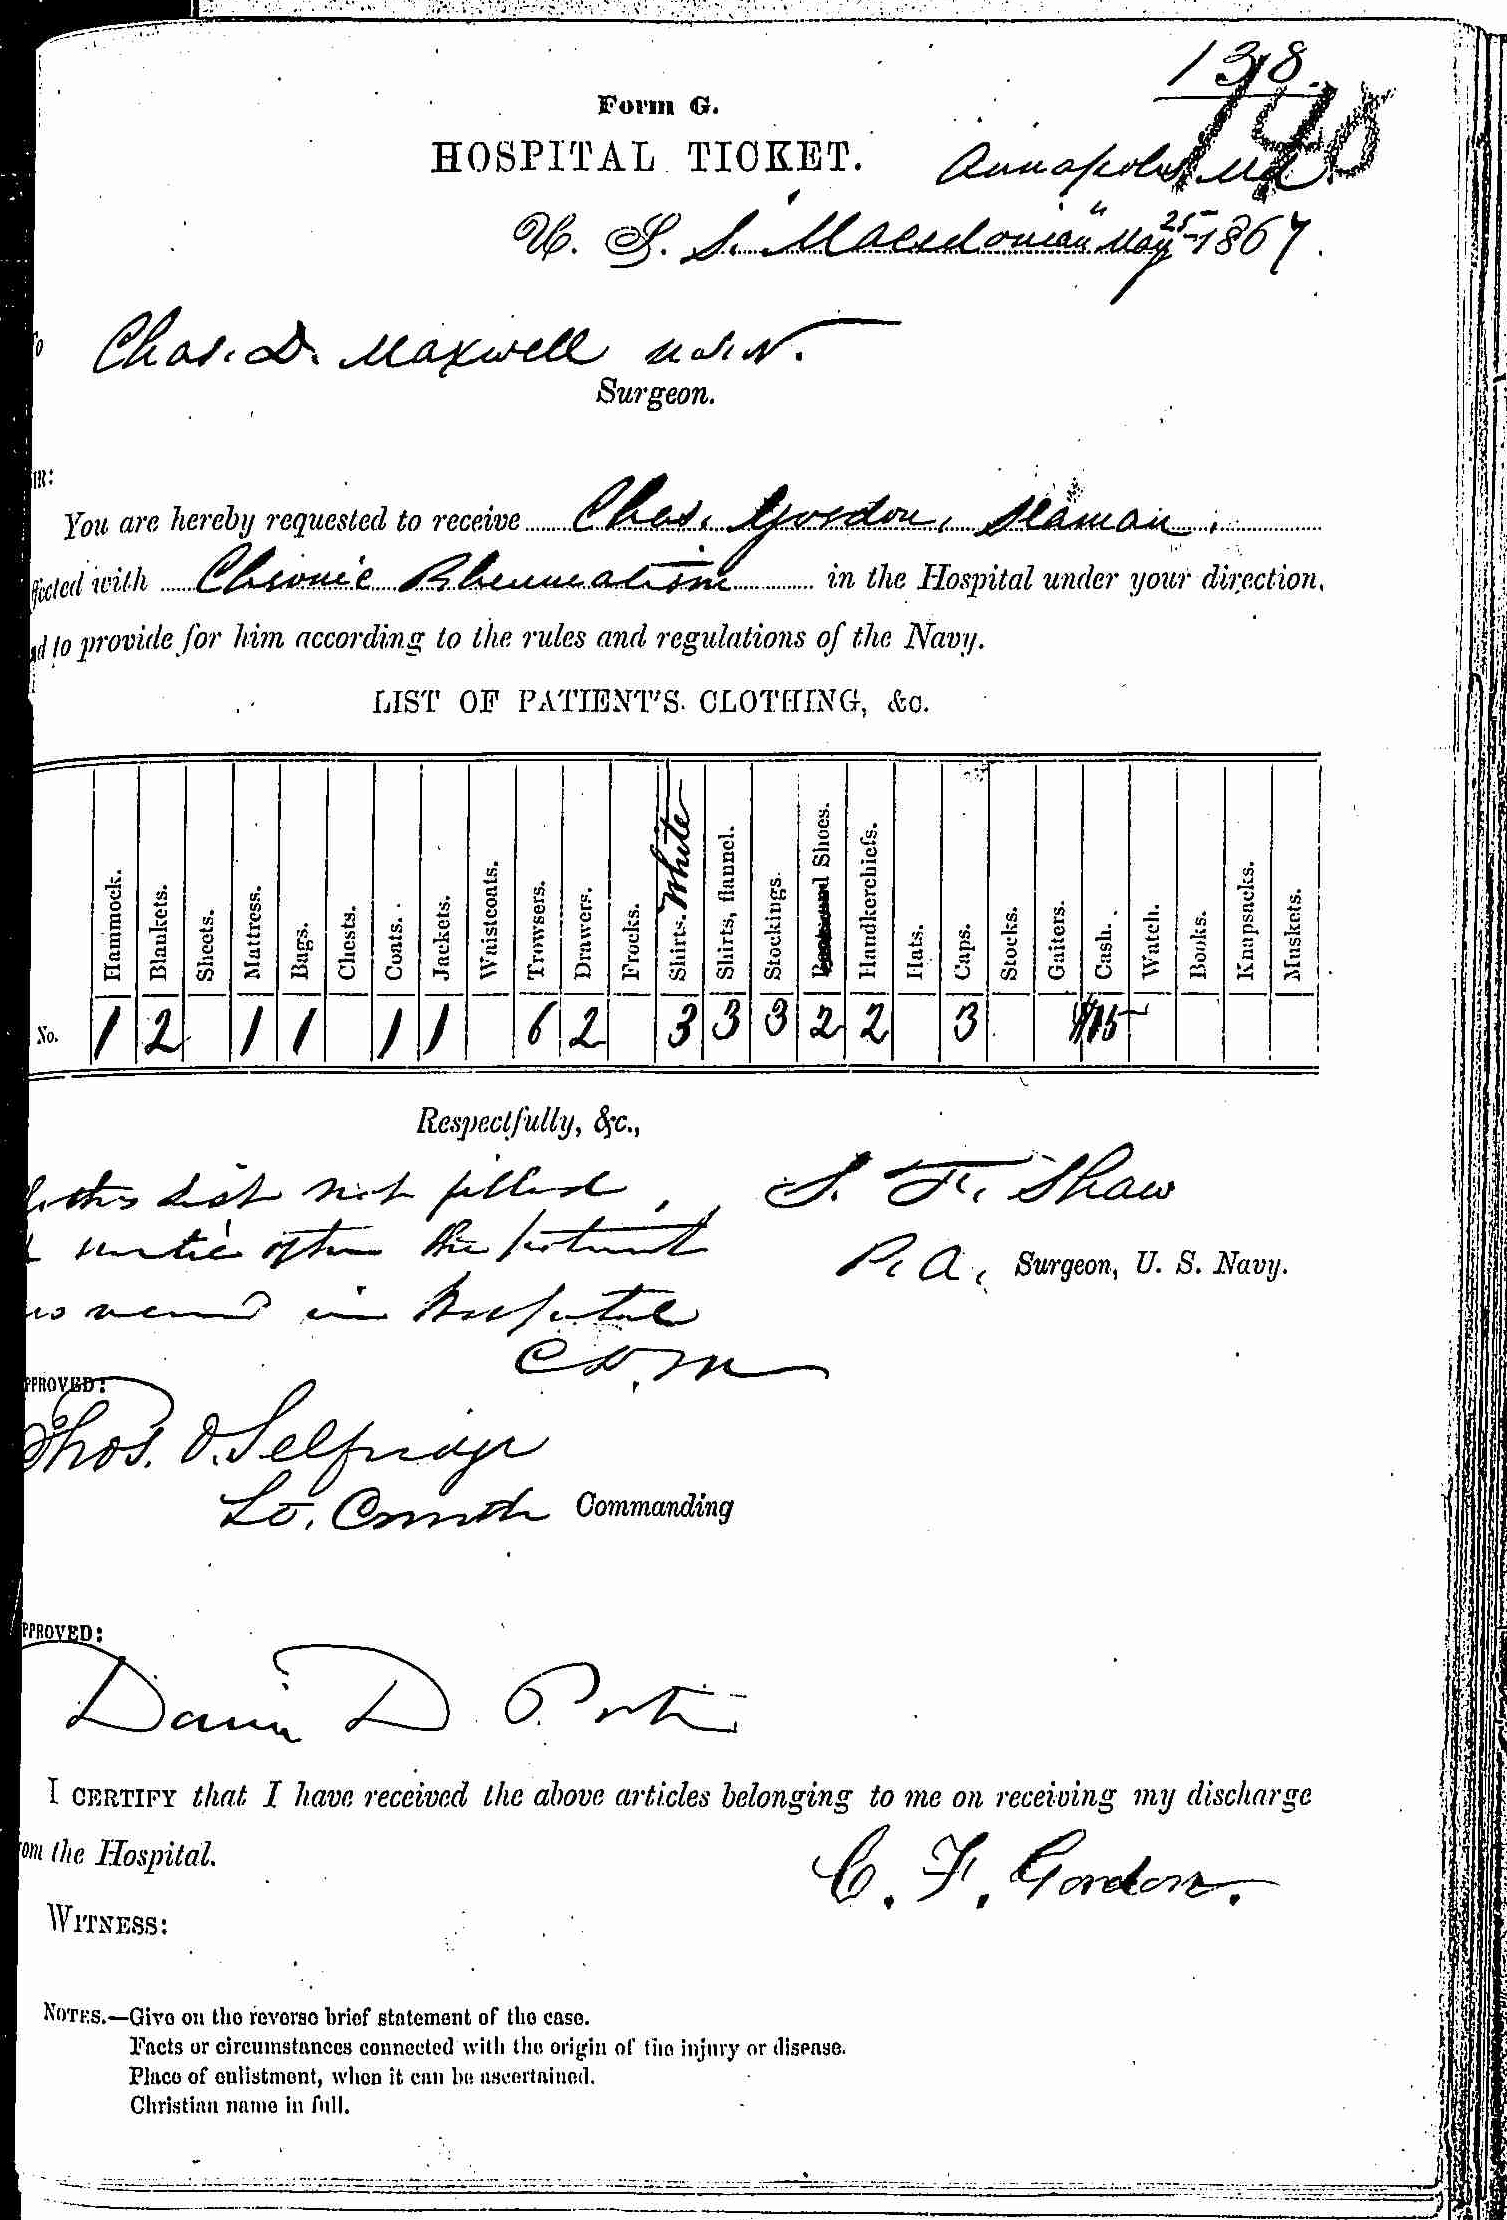 Entry for Charles Gordon (page 1 of 2) in the log Hospital Tickets and Case Papers - Naval Hospital - Washington, D.C. - 1866-68